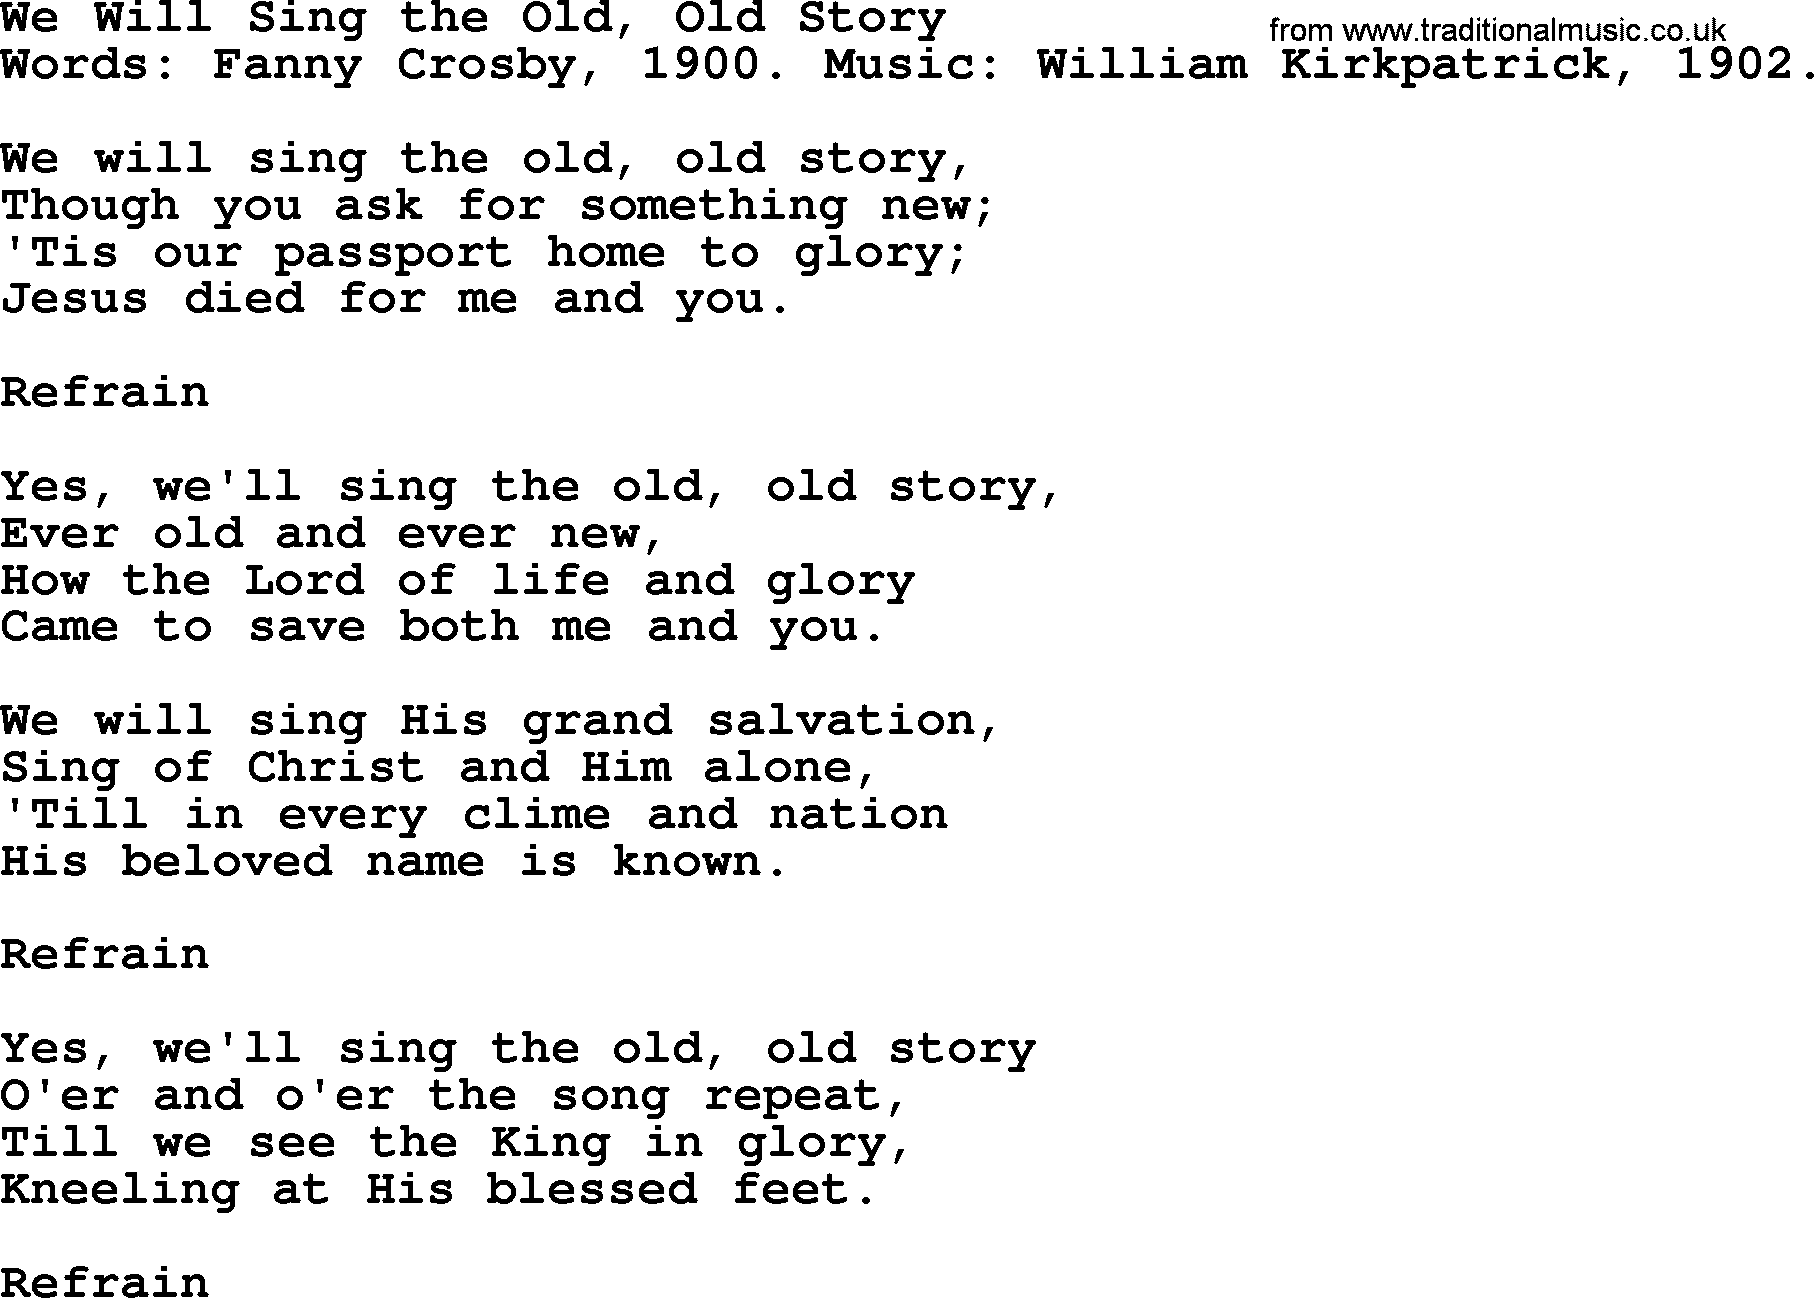 Fanny Crosby song: We Will Sing The Old, Old Story, lyrics